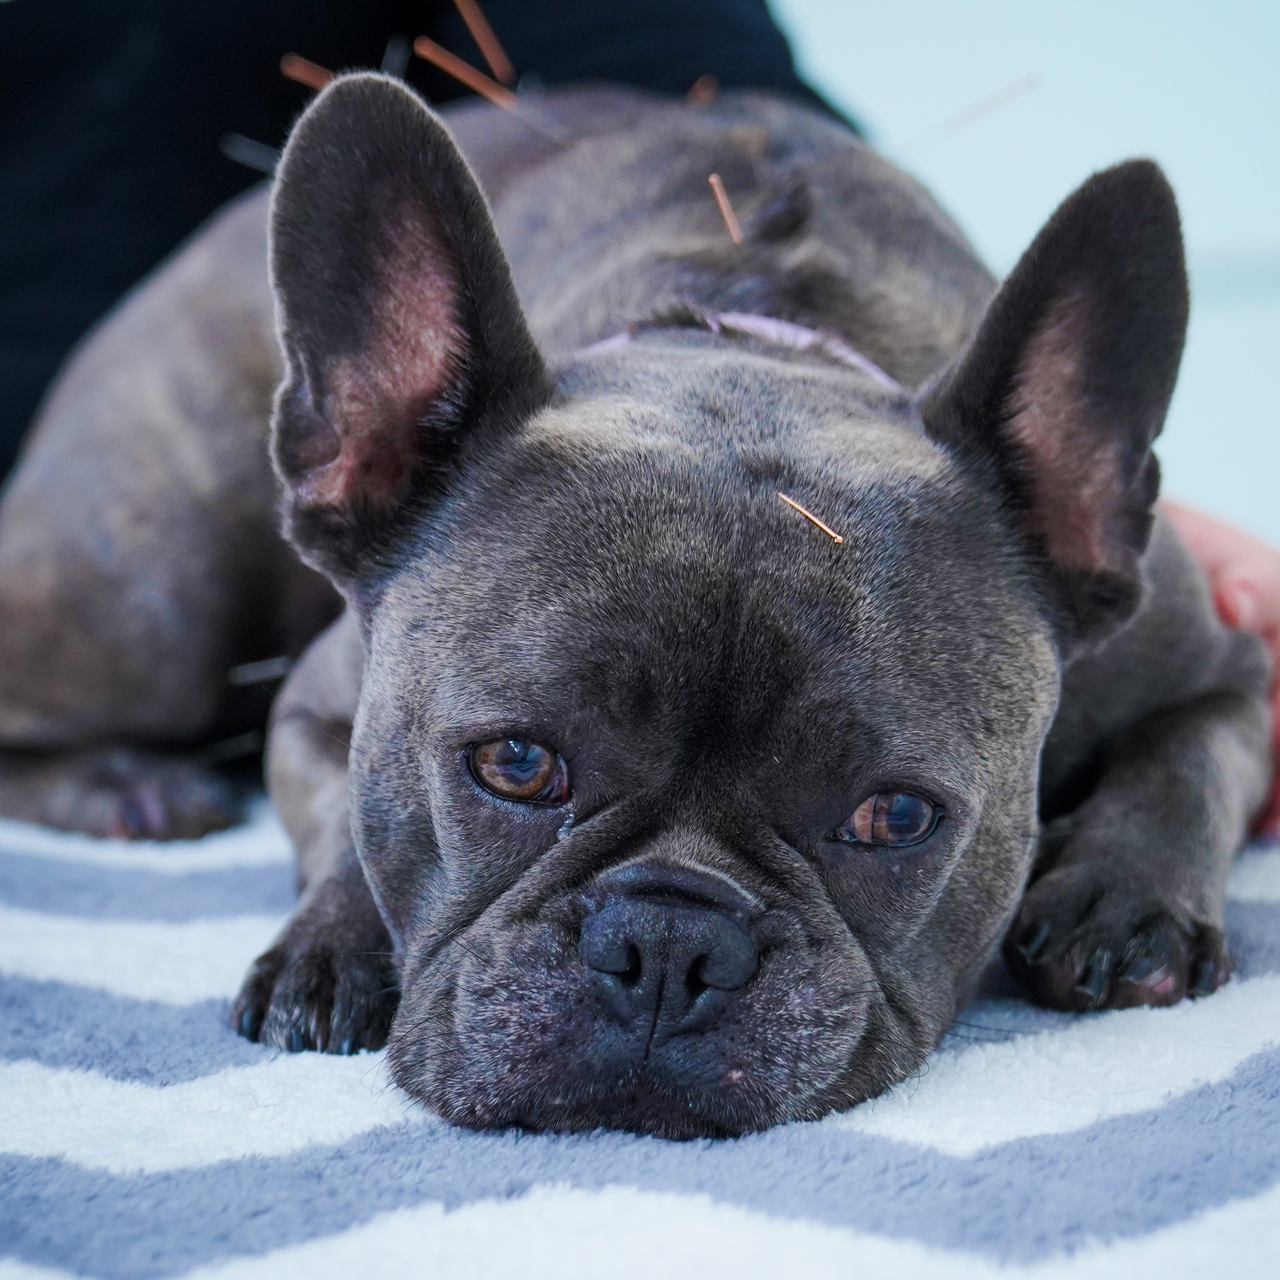 A French bulldog in acupuncture treatment